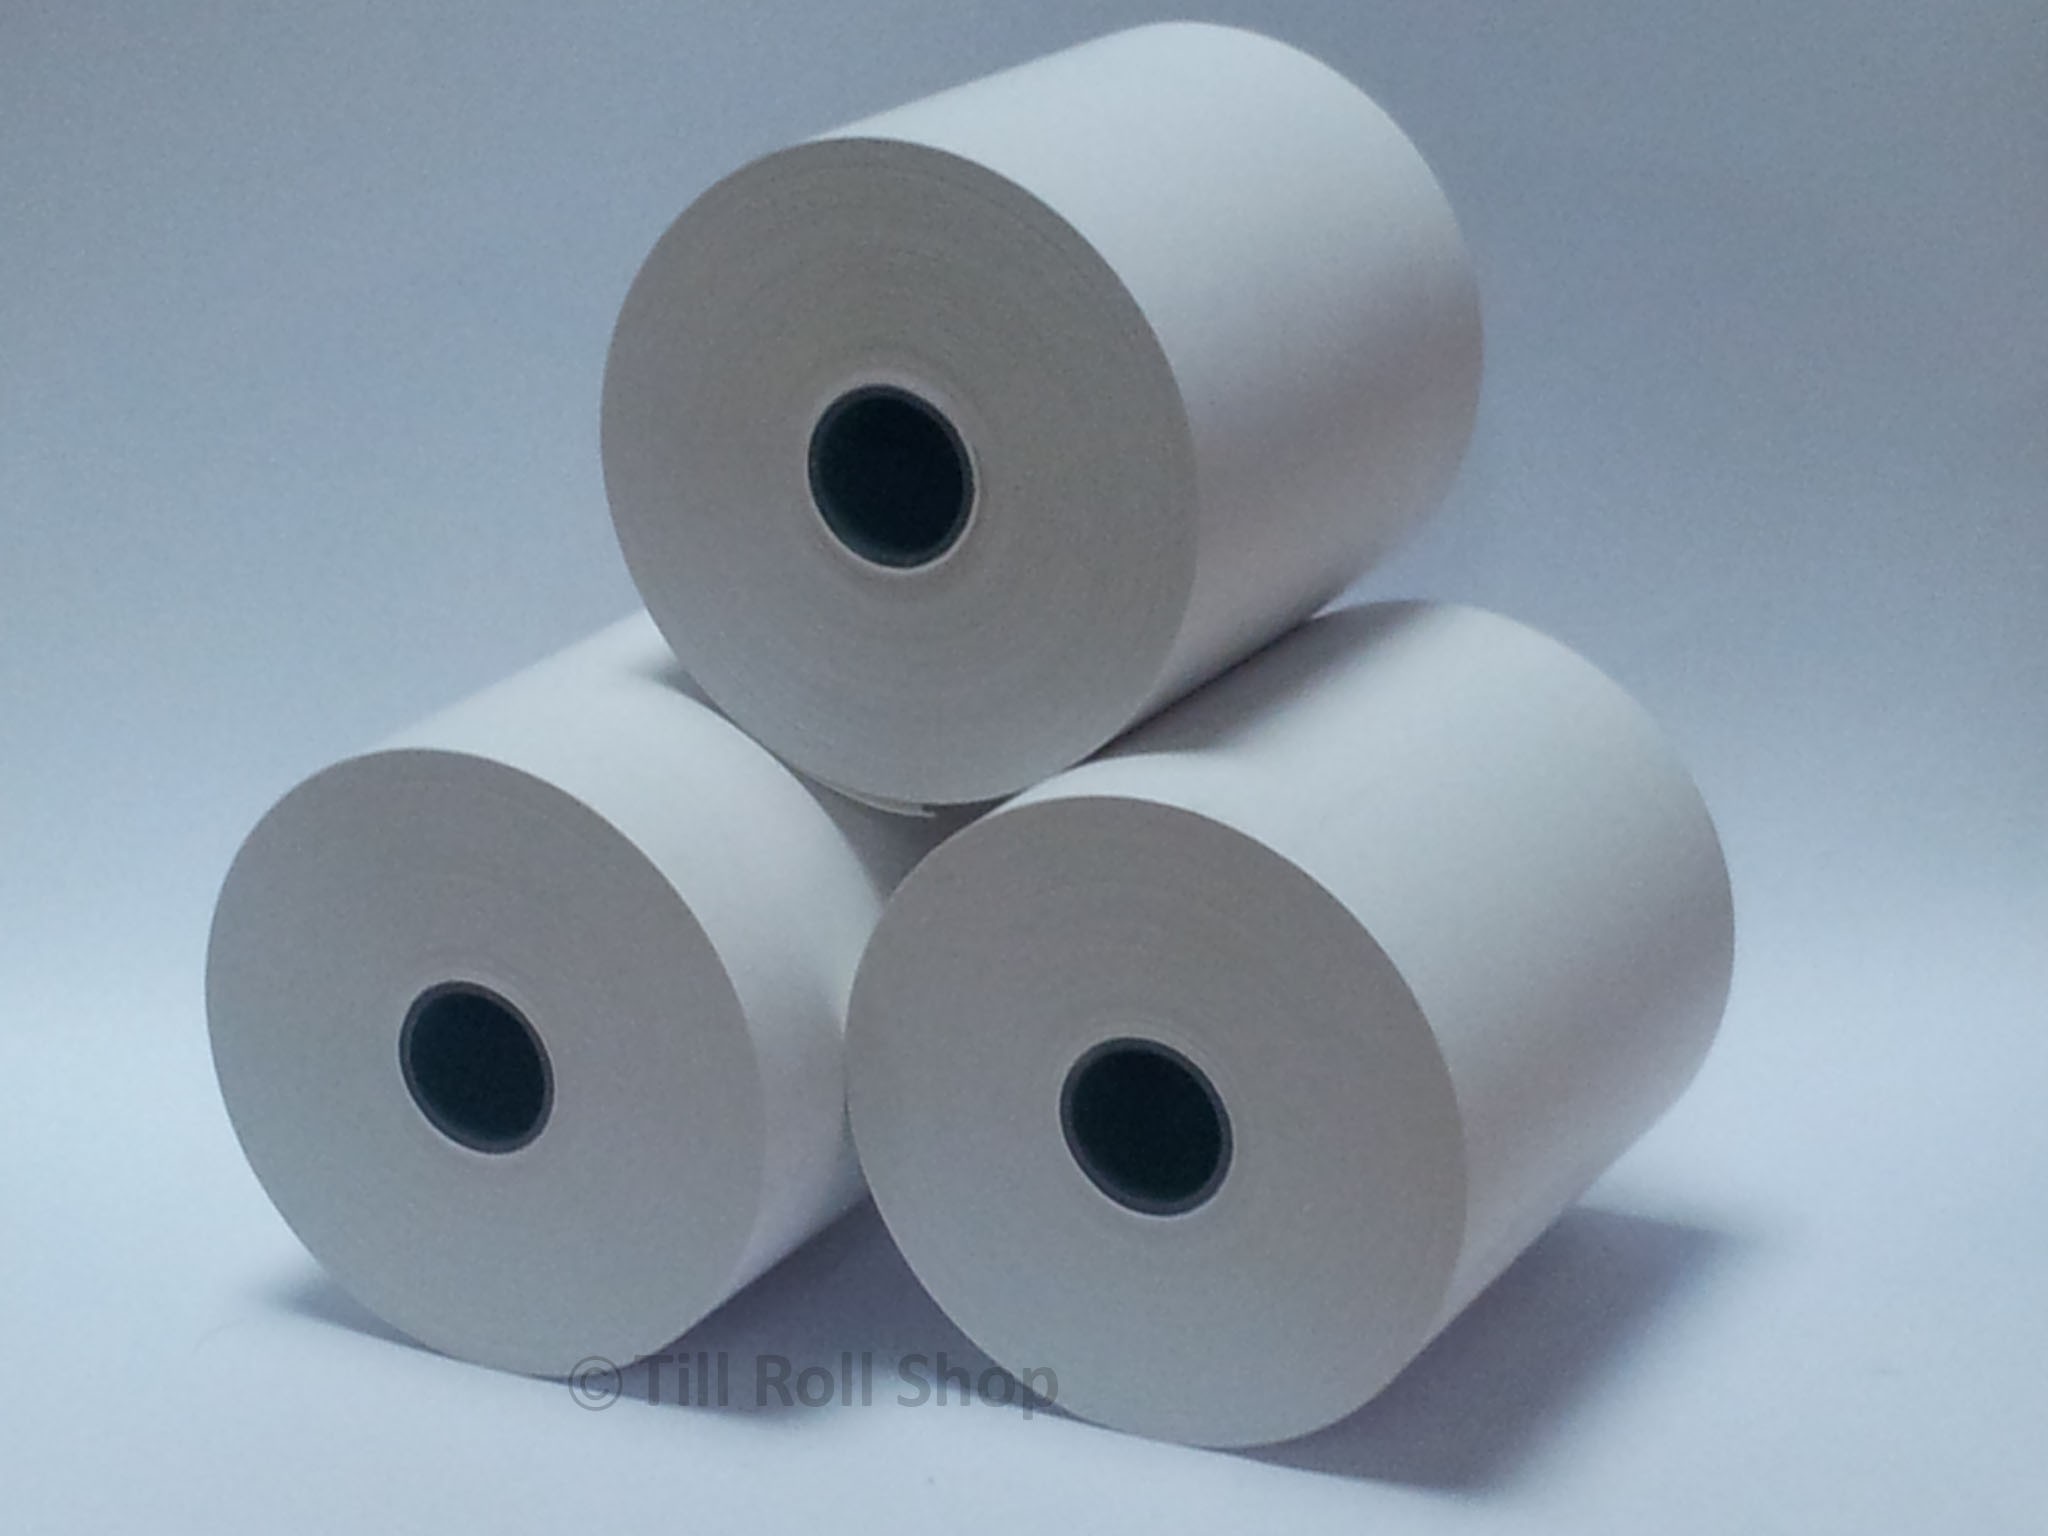 57mmx40mm Thermal Paper Till Roll For PDQ CreditCard Worldpay Streamline Machine 